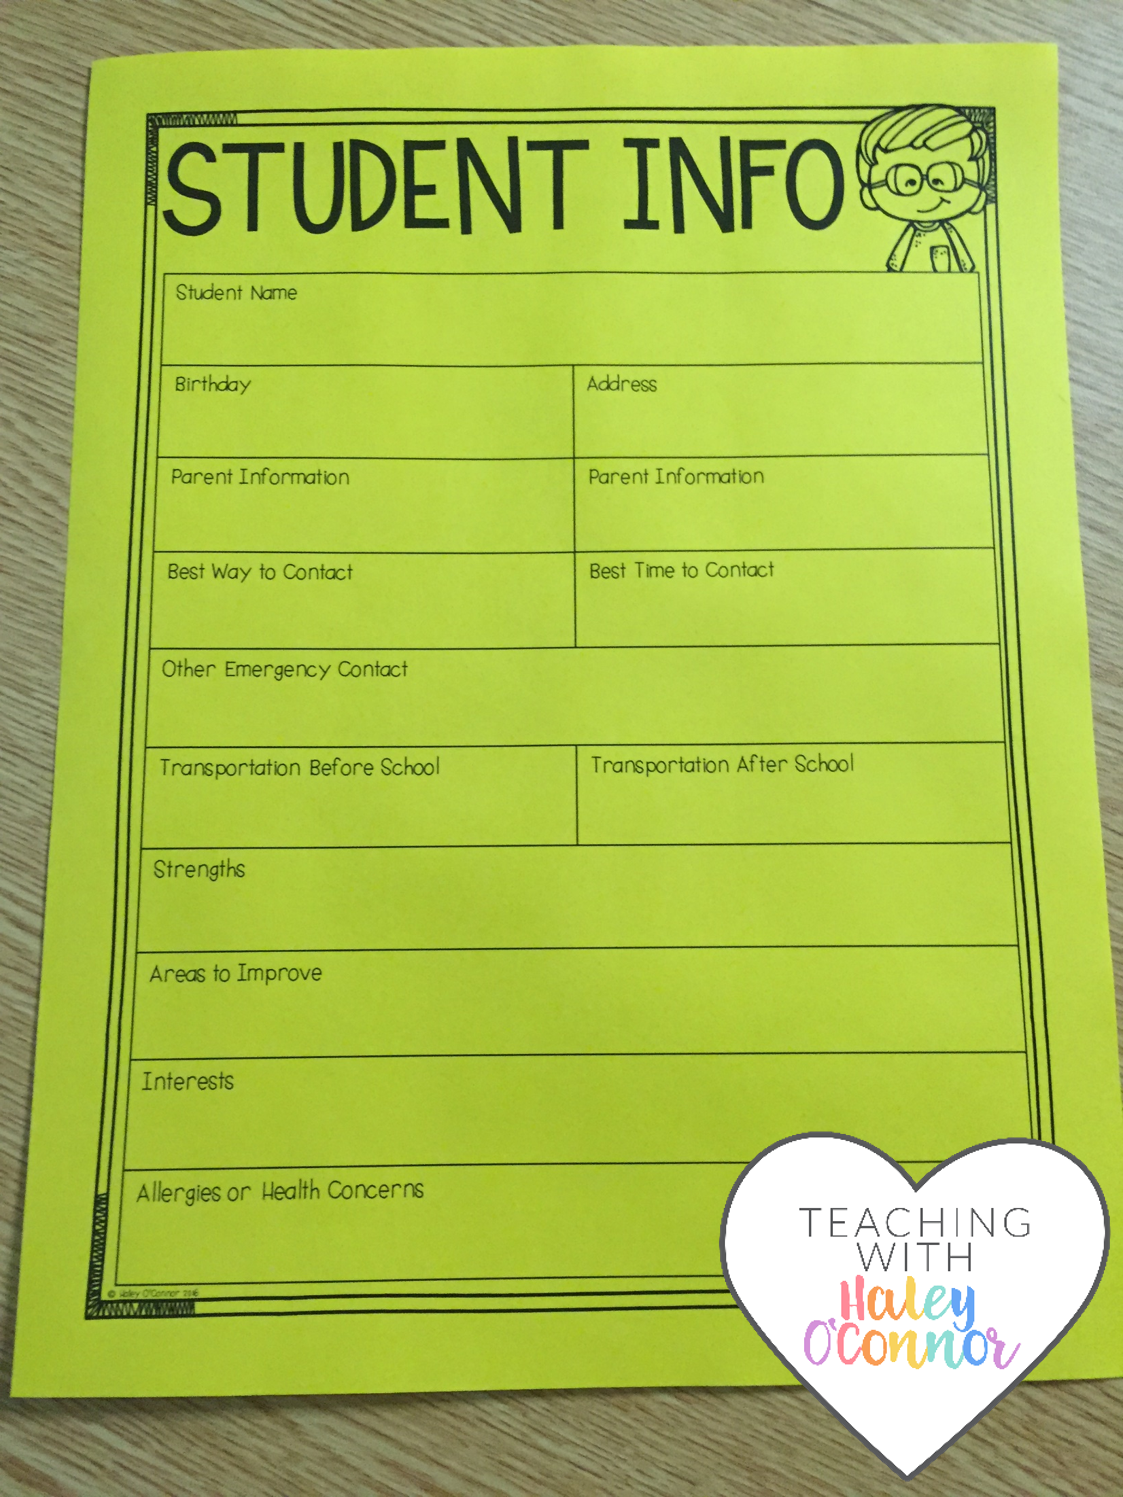 Student Information Sheet for Teachers by Haley O'Connor 